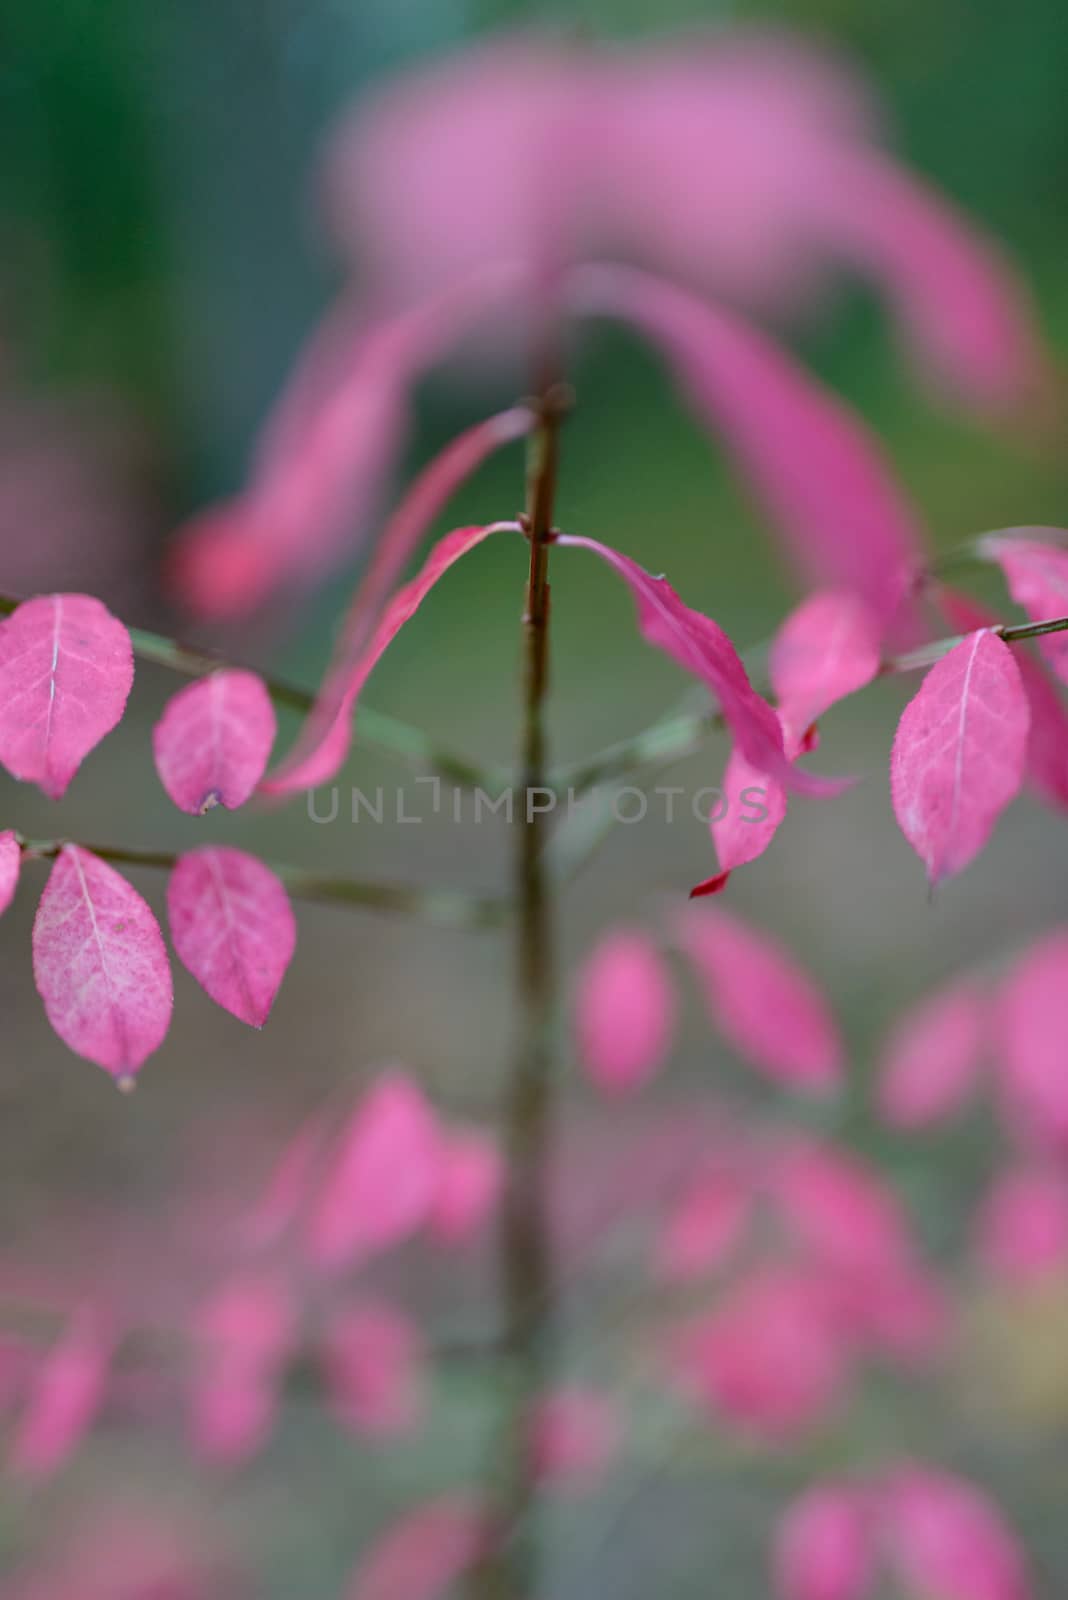 Autumn pink Leaves in the forest. Shallow depth of field